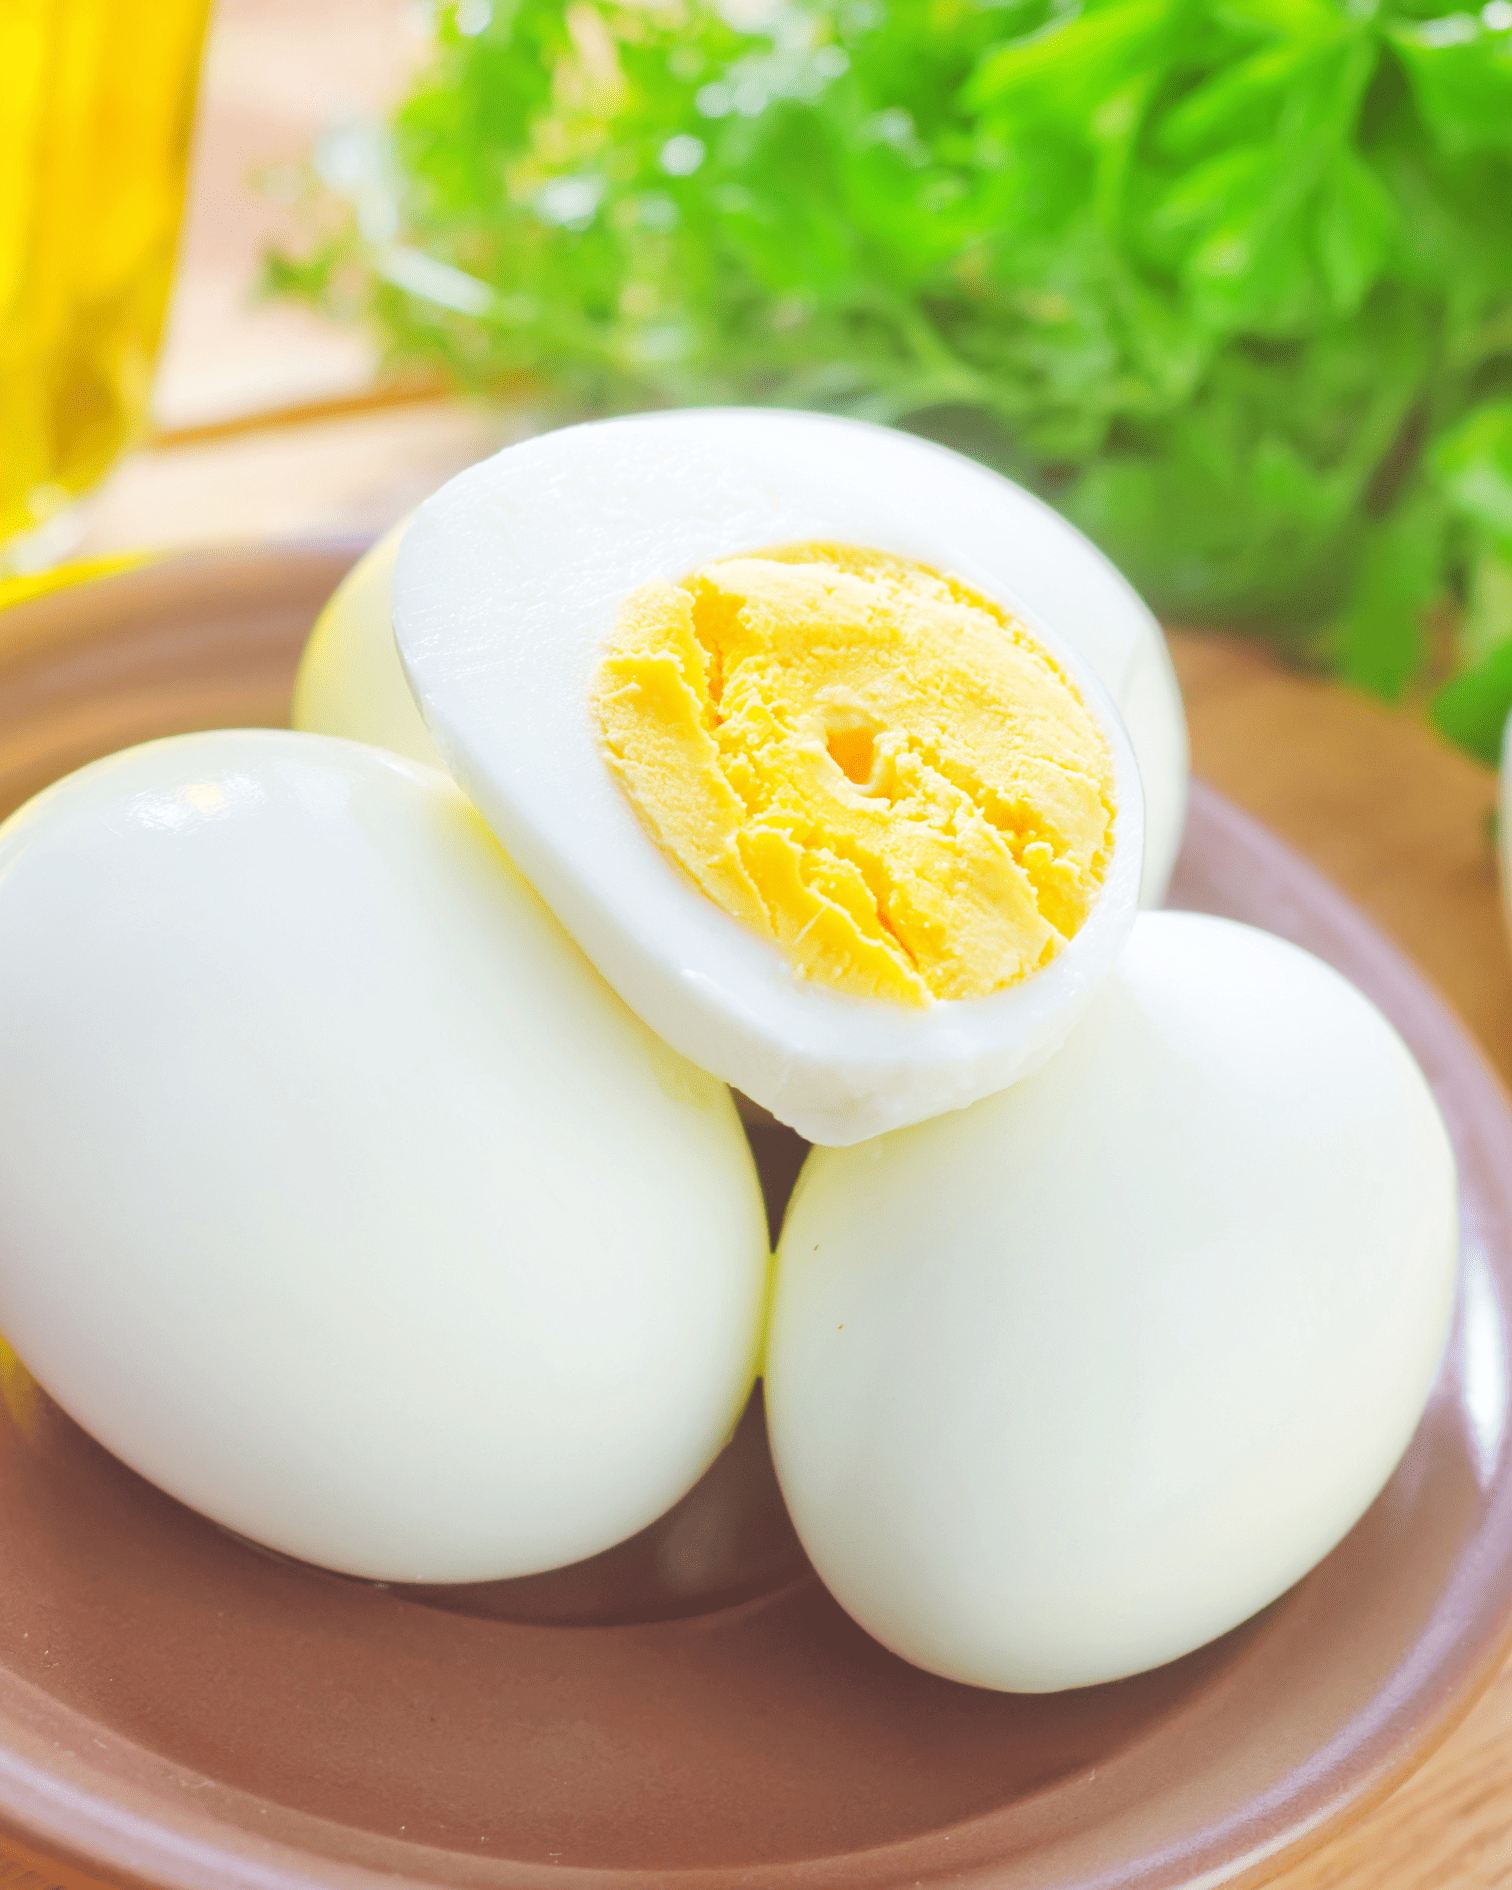 Hard cooked eggs for easy balanced lunch plate